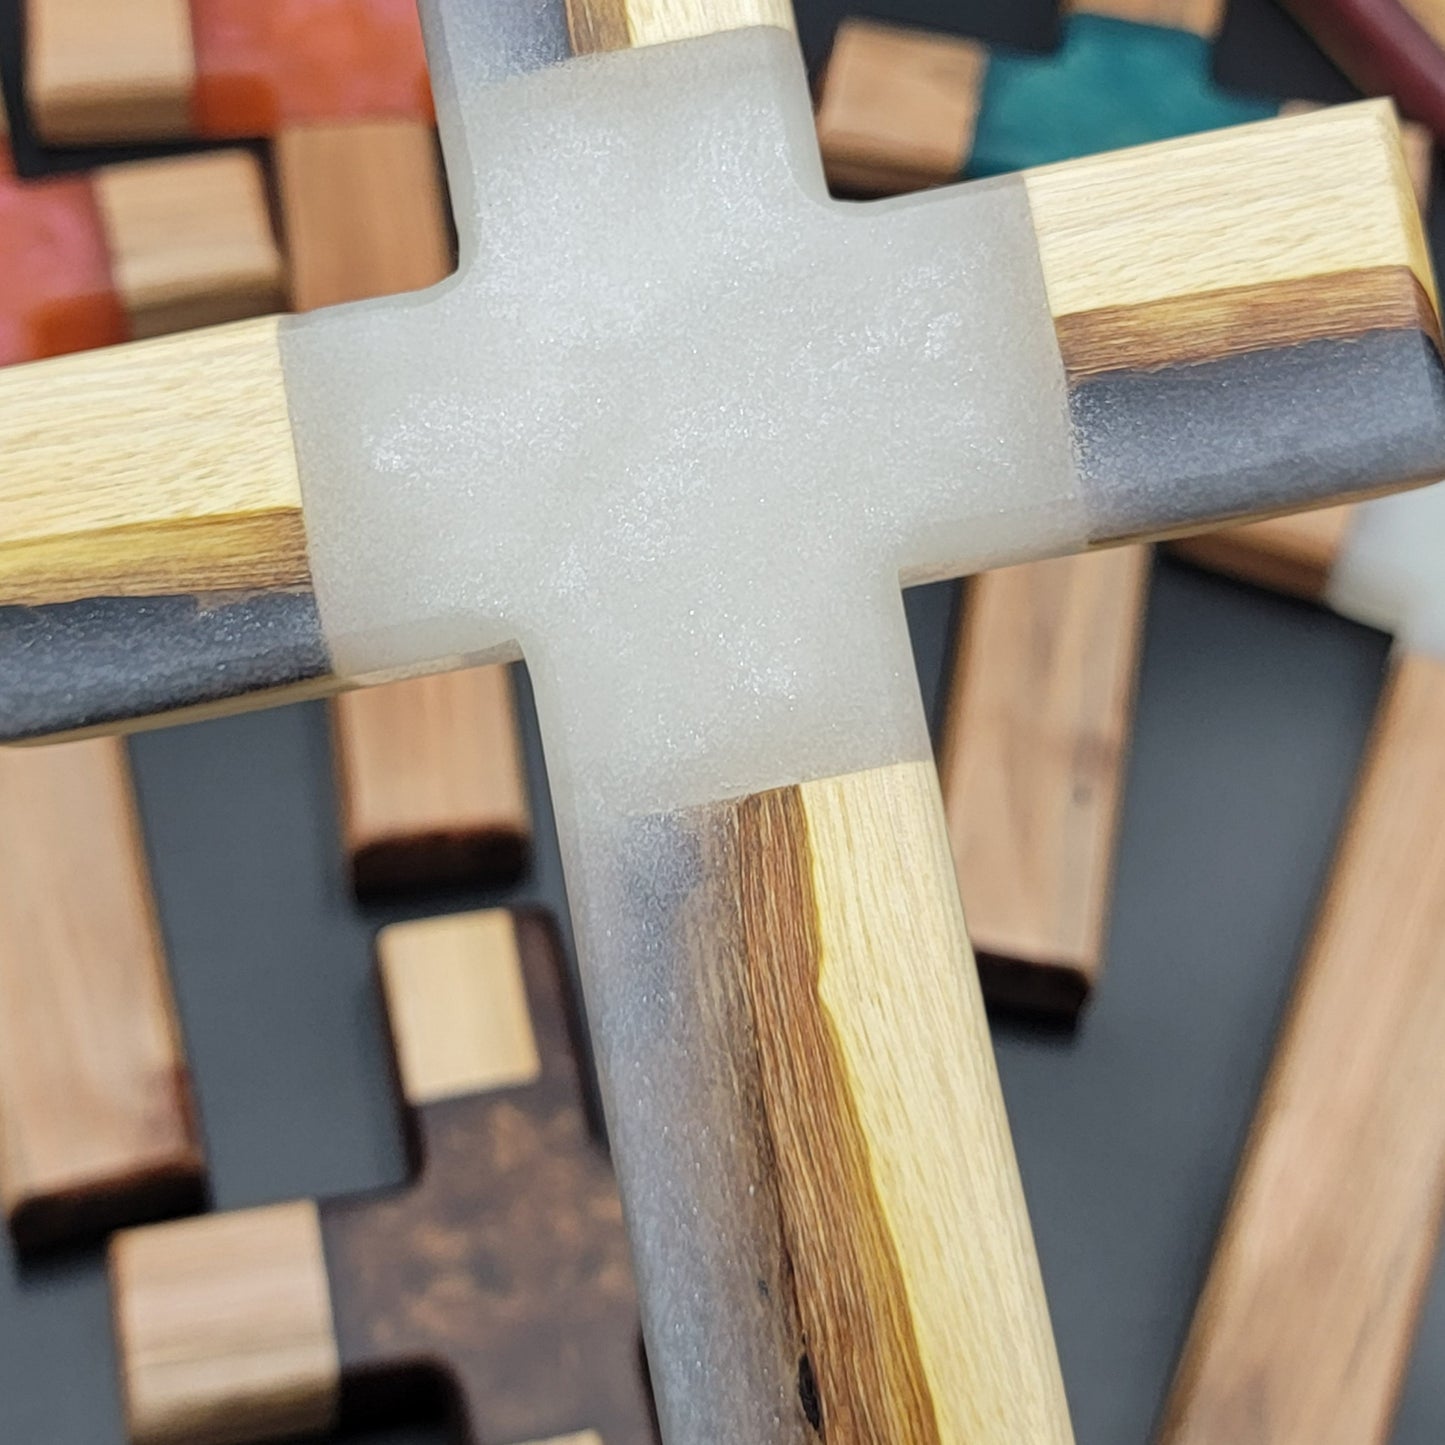 Grace Cascade Cross: Give the Gift of God's Love